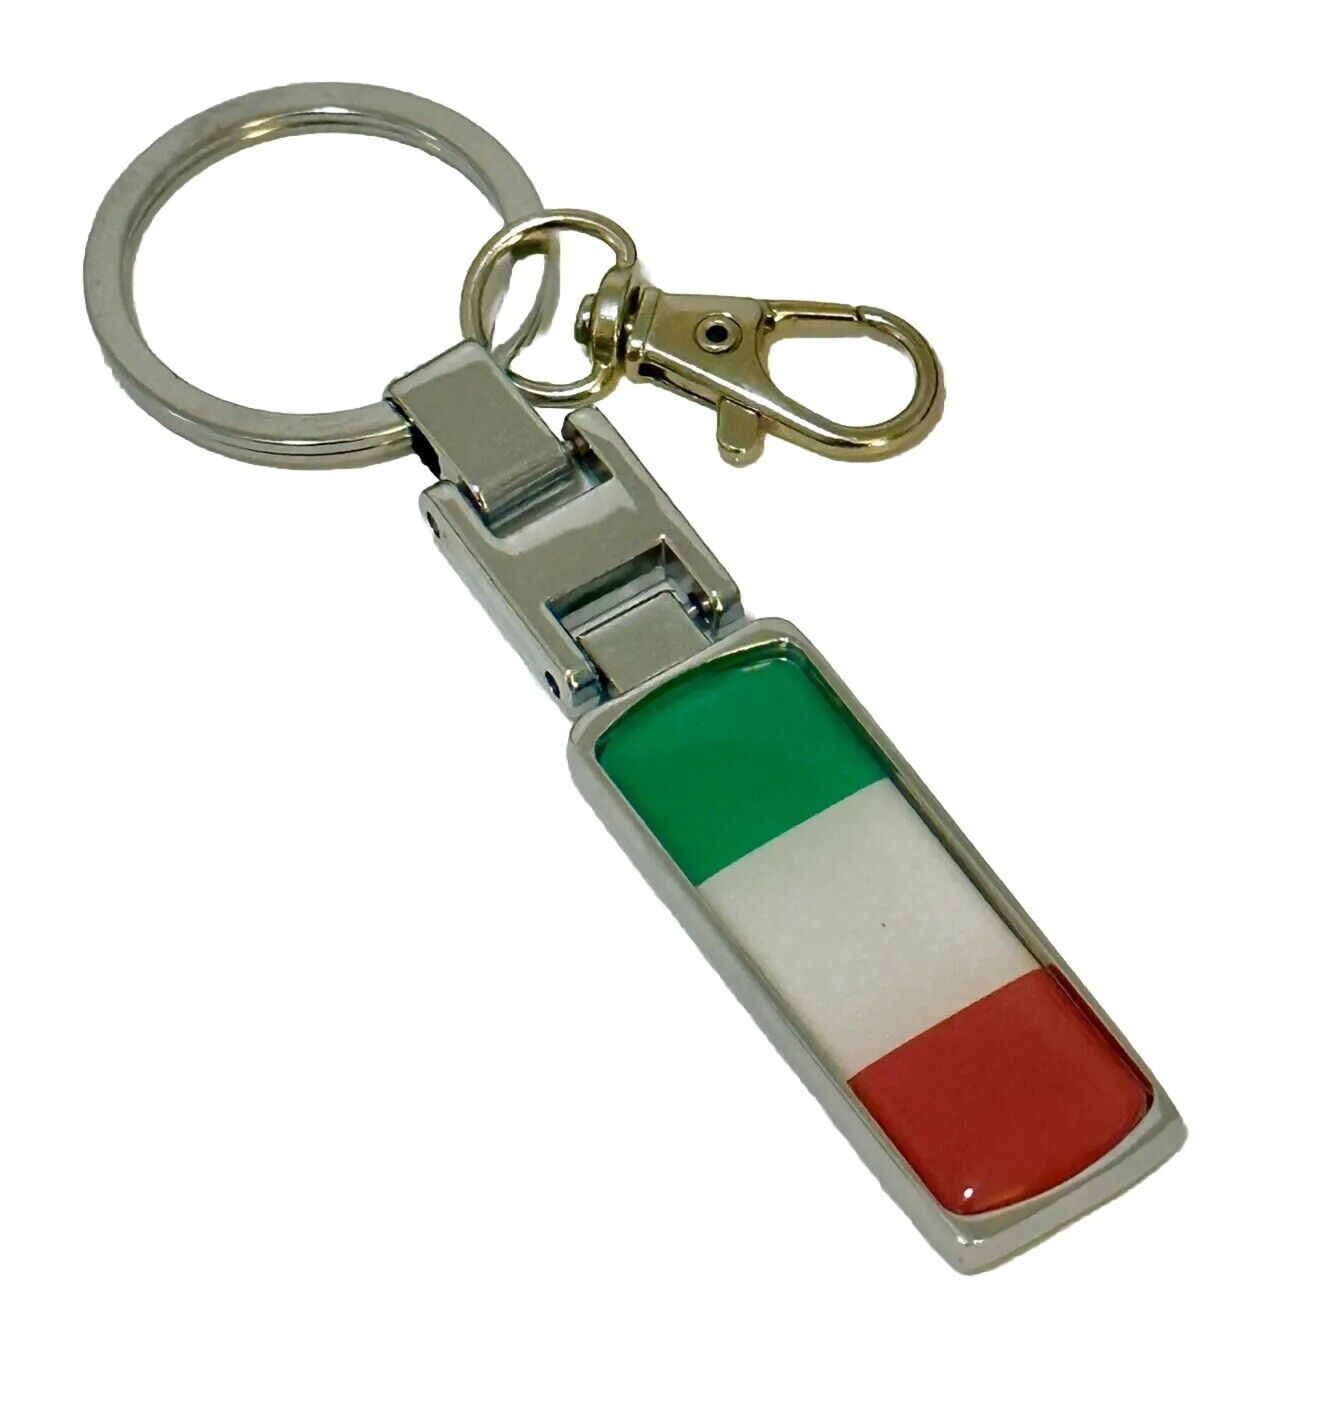 ITALY ITALIA Flag METAL KEYCHAIN Double Sided makes great great gift